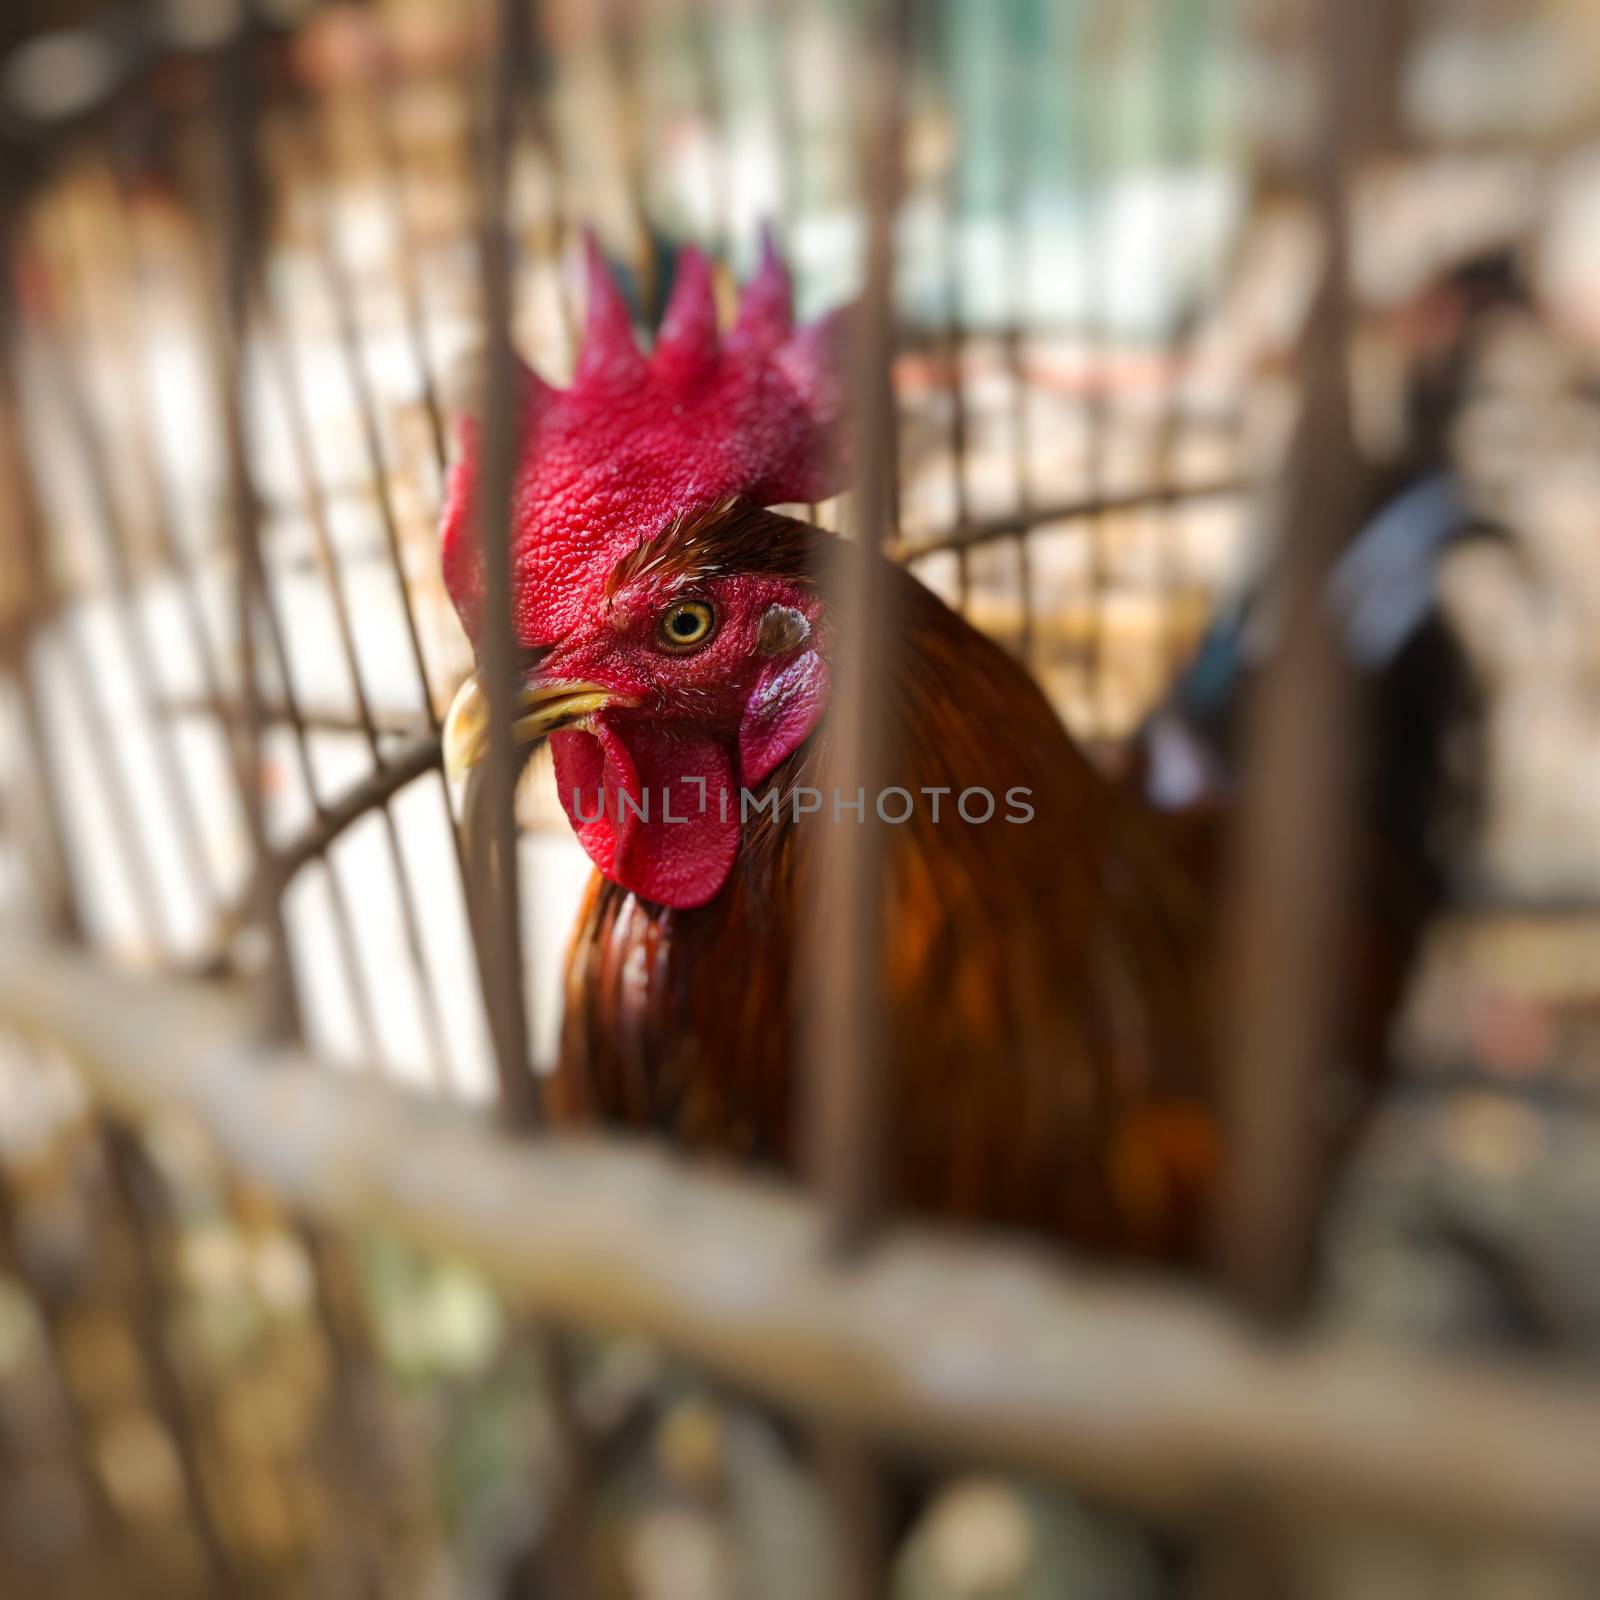 Caged rooster ready to sell at street market in Yogjakarta, Indonesia.